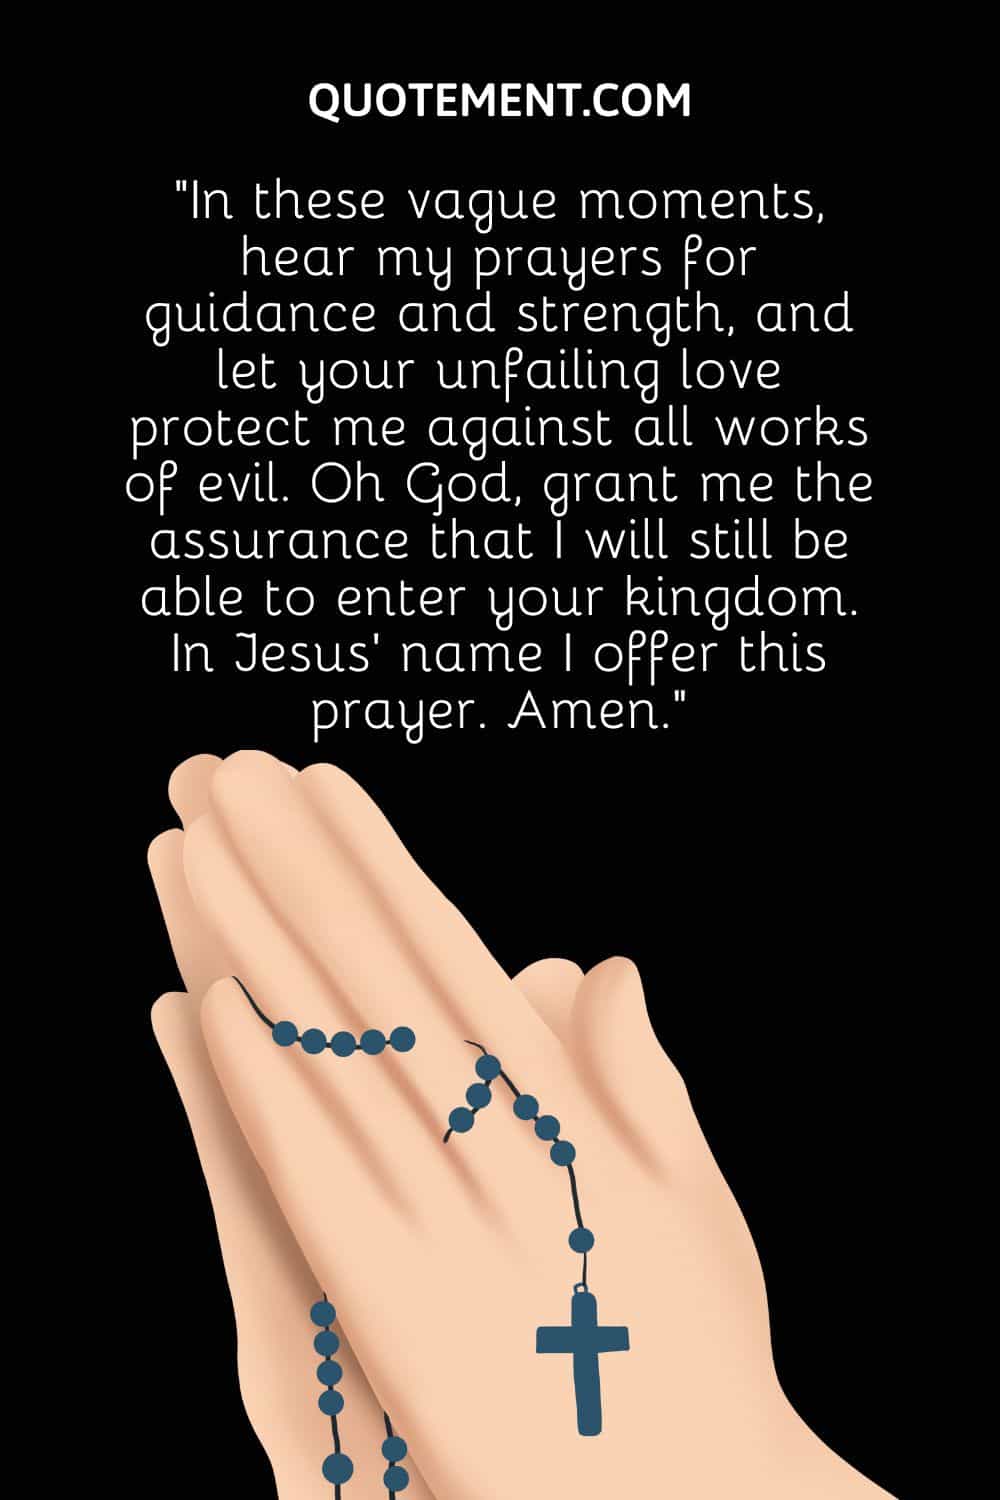 “In these vague moments, hear my prayers for guidance and strength, and let your unfailing love protect me against all works of evil.